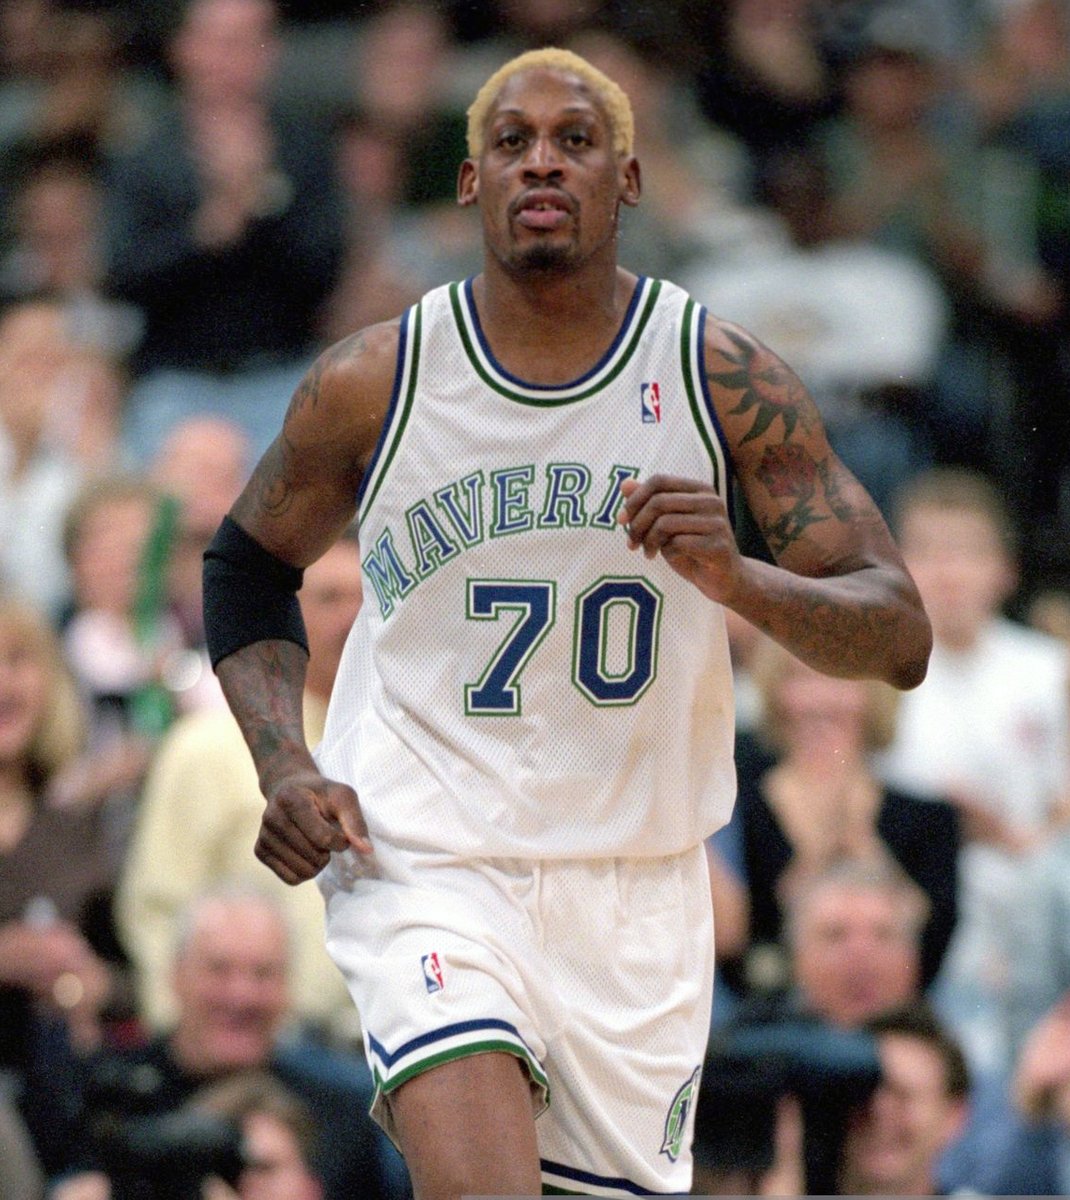 and 20 years ago, Dennis Rodman grabbed 14.3 rebounds per game for the Dallas Mavericks in 12 appearances.